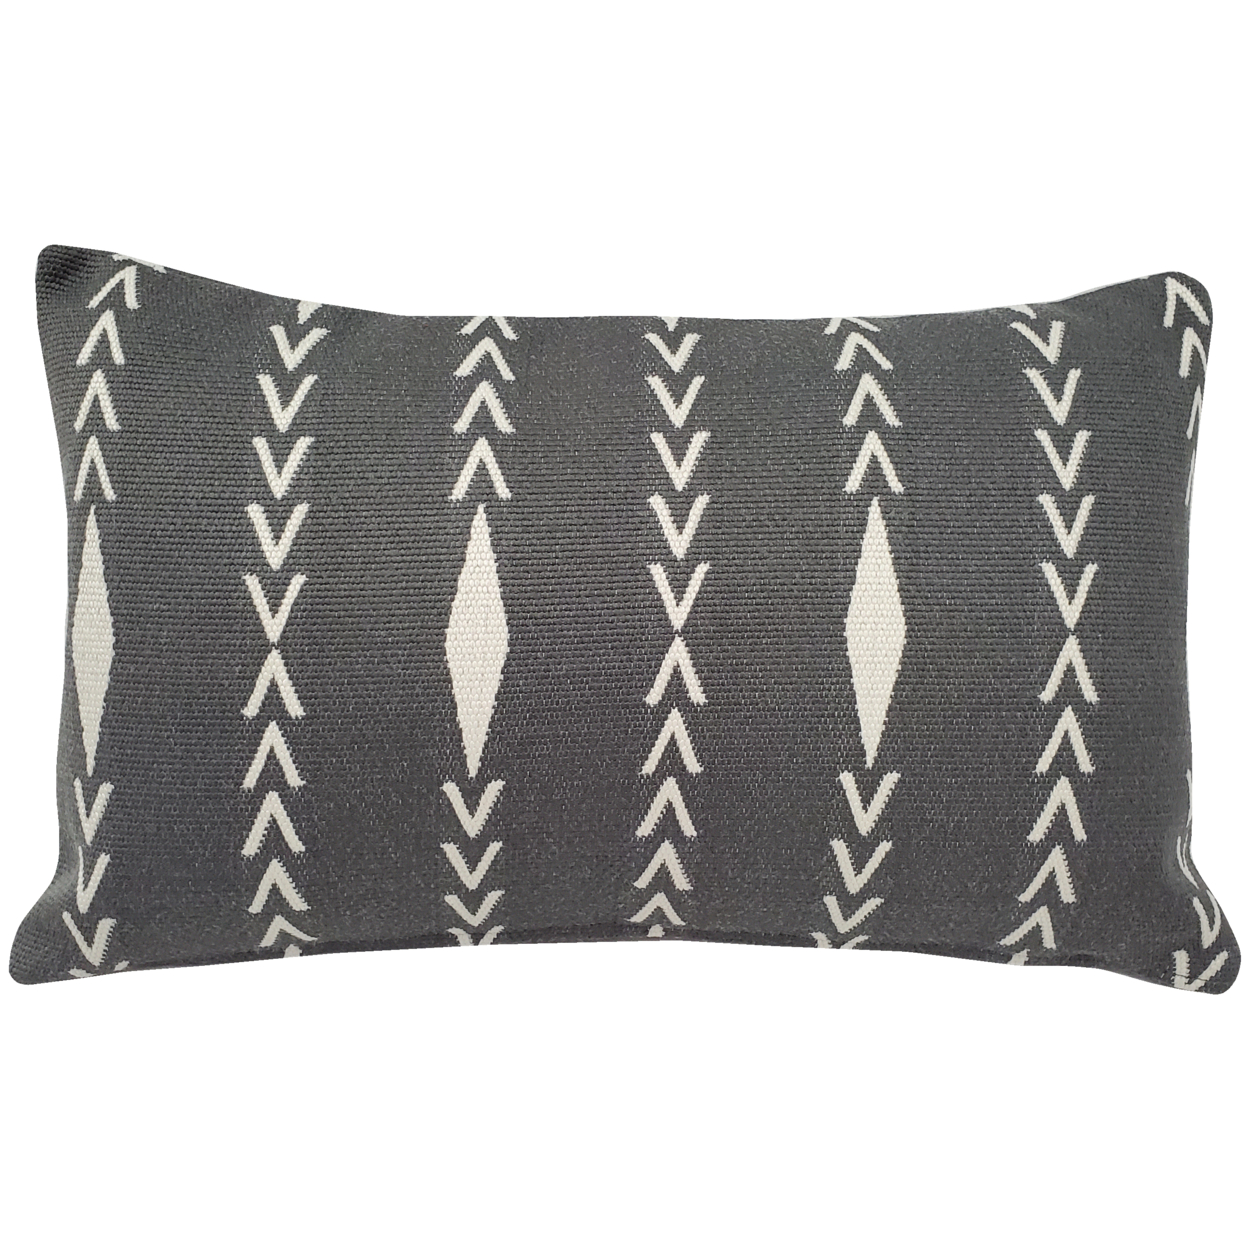 Diamond Ray Charcoal Gray Throw Pillow 12x20, With Polyfill Insert